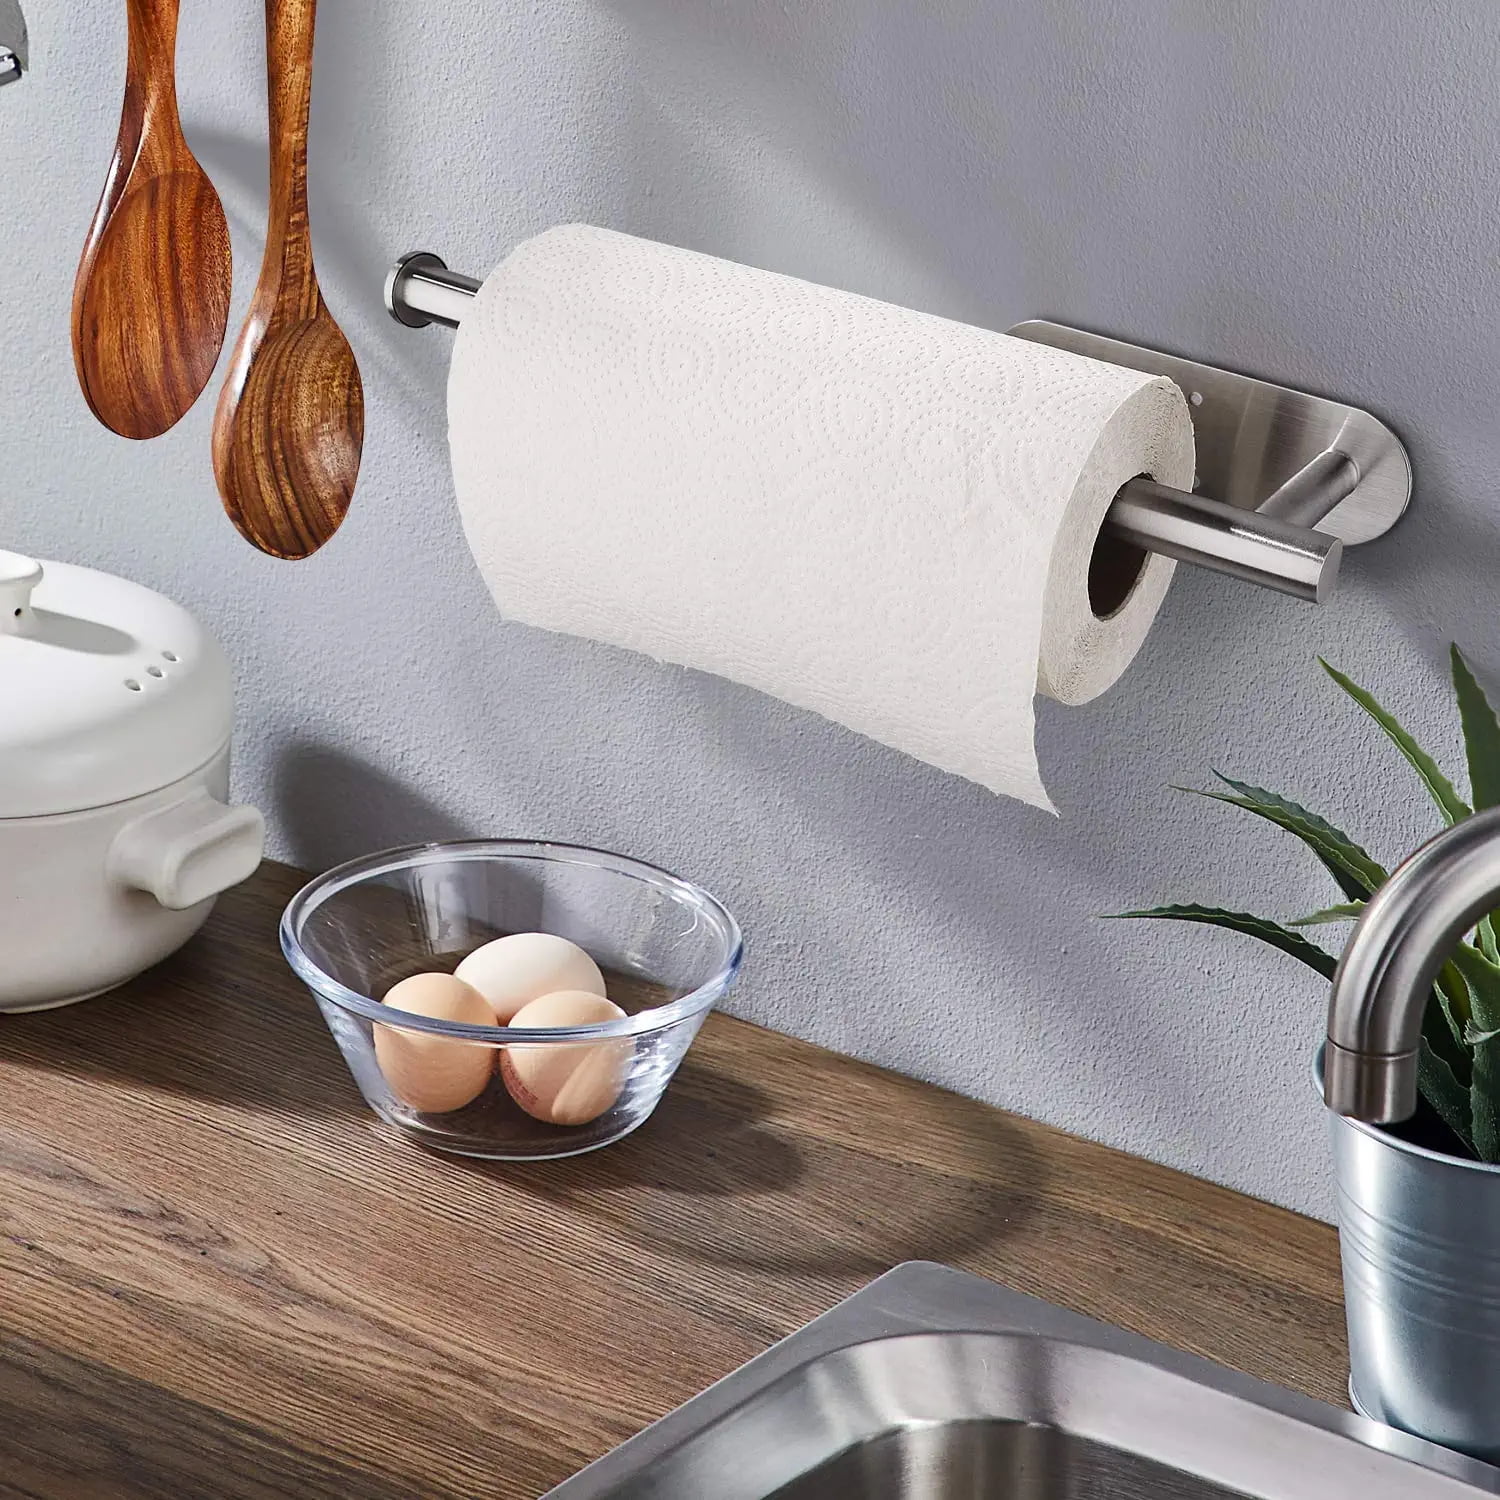 PHUNAYA Under Cabinet Paper Towel Holder Wall Mount for Home